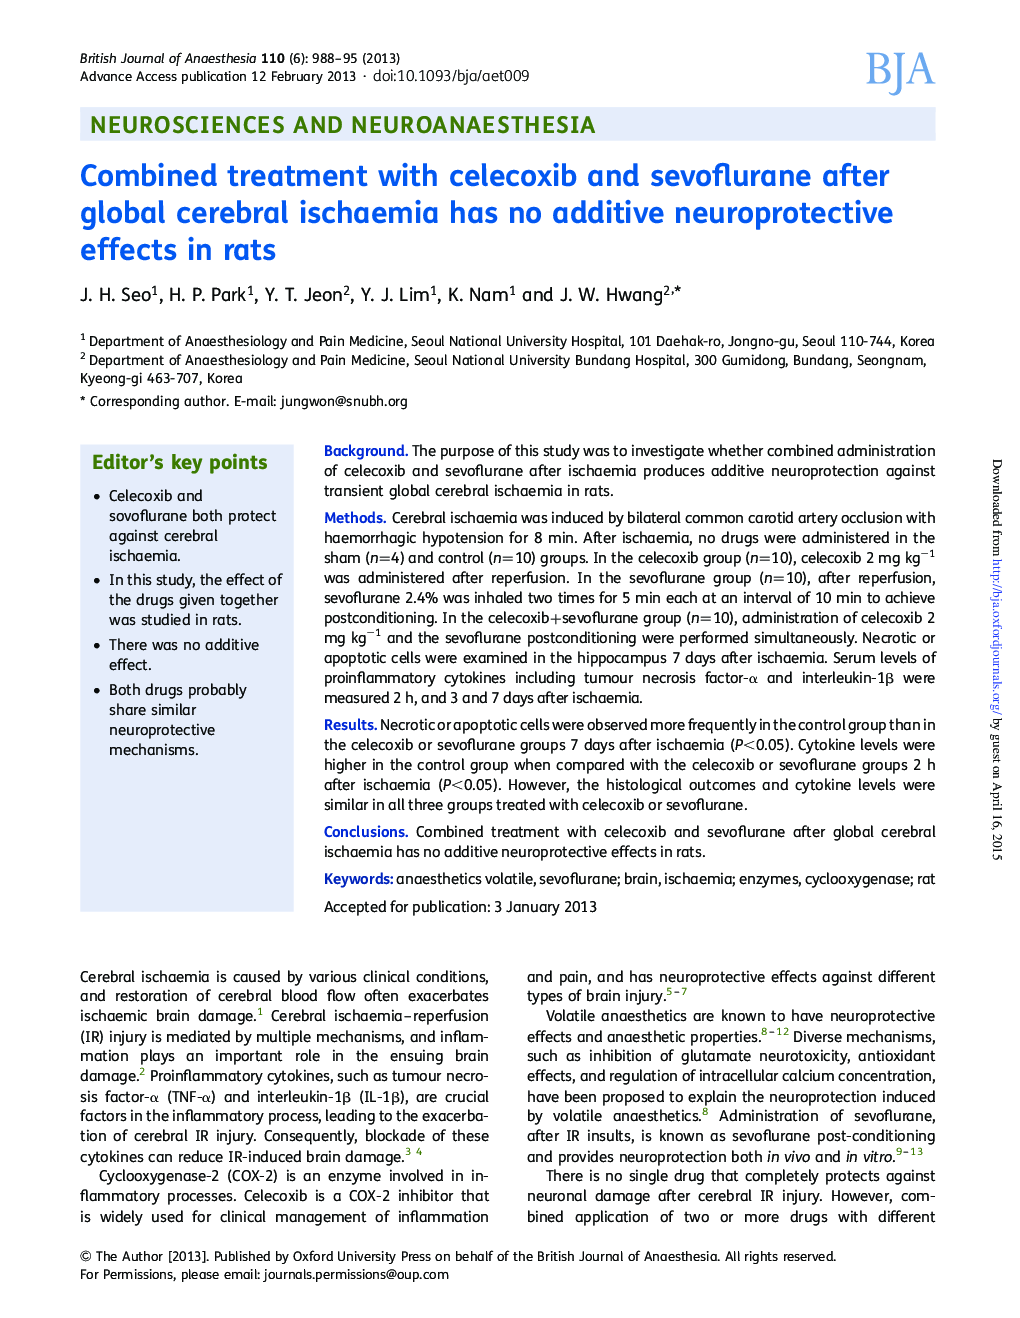 Combined treatment with celecoxib and sevoflurane after global cerebral ischaemia has no additive neuroprotective effects in rats